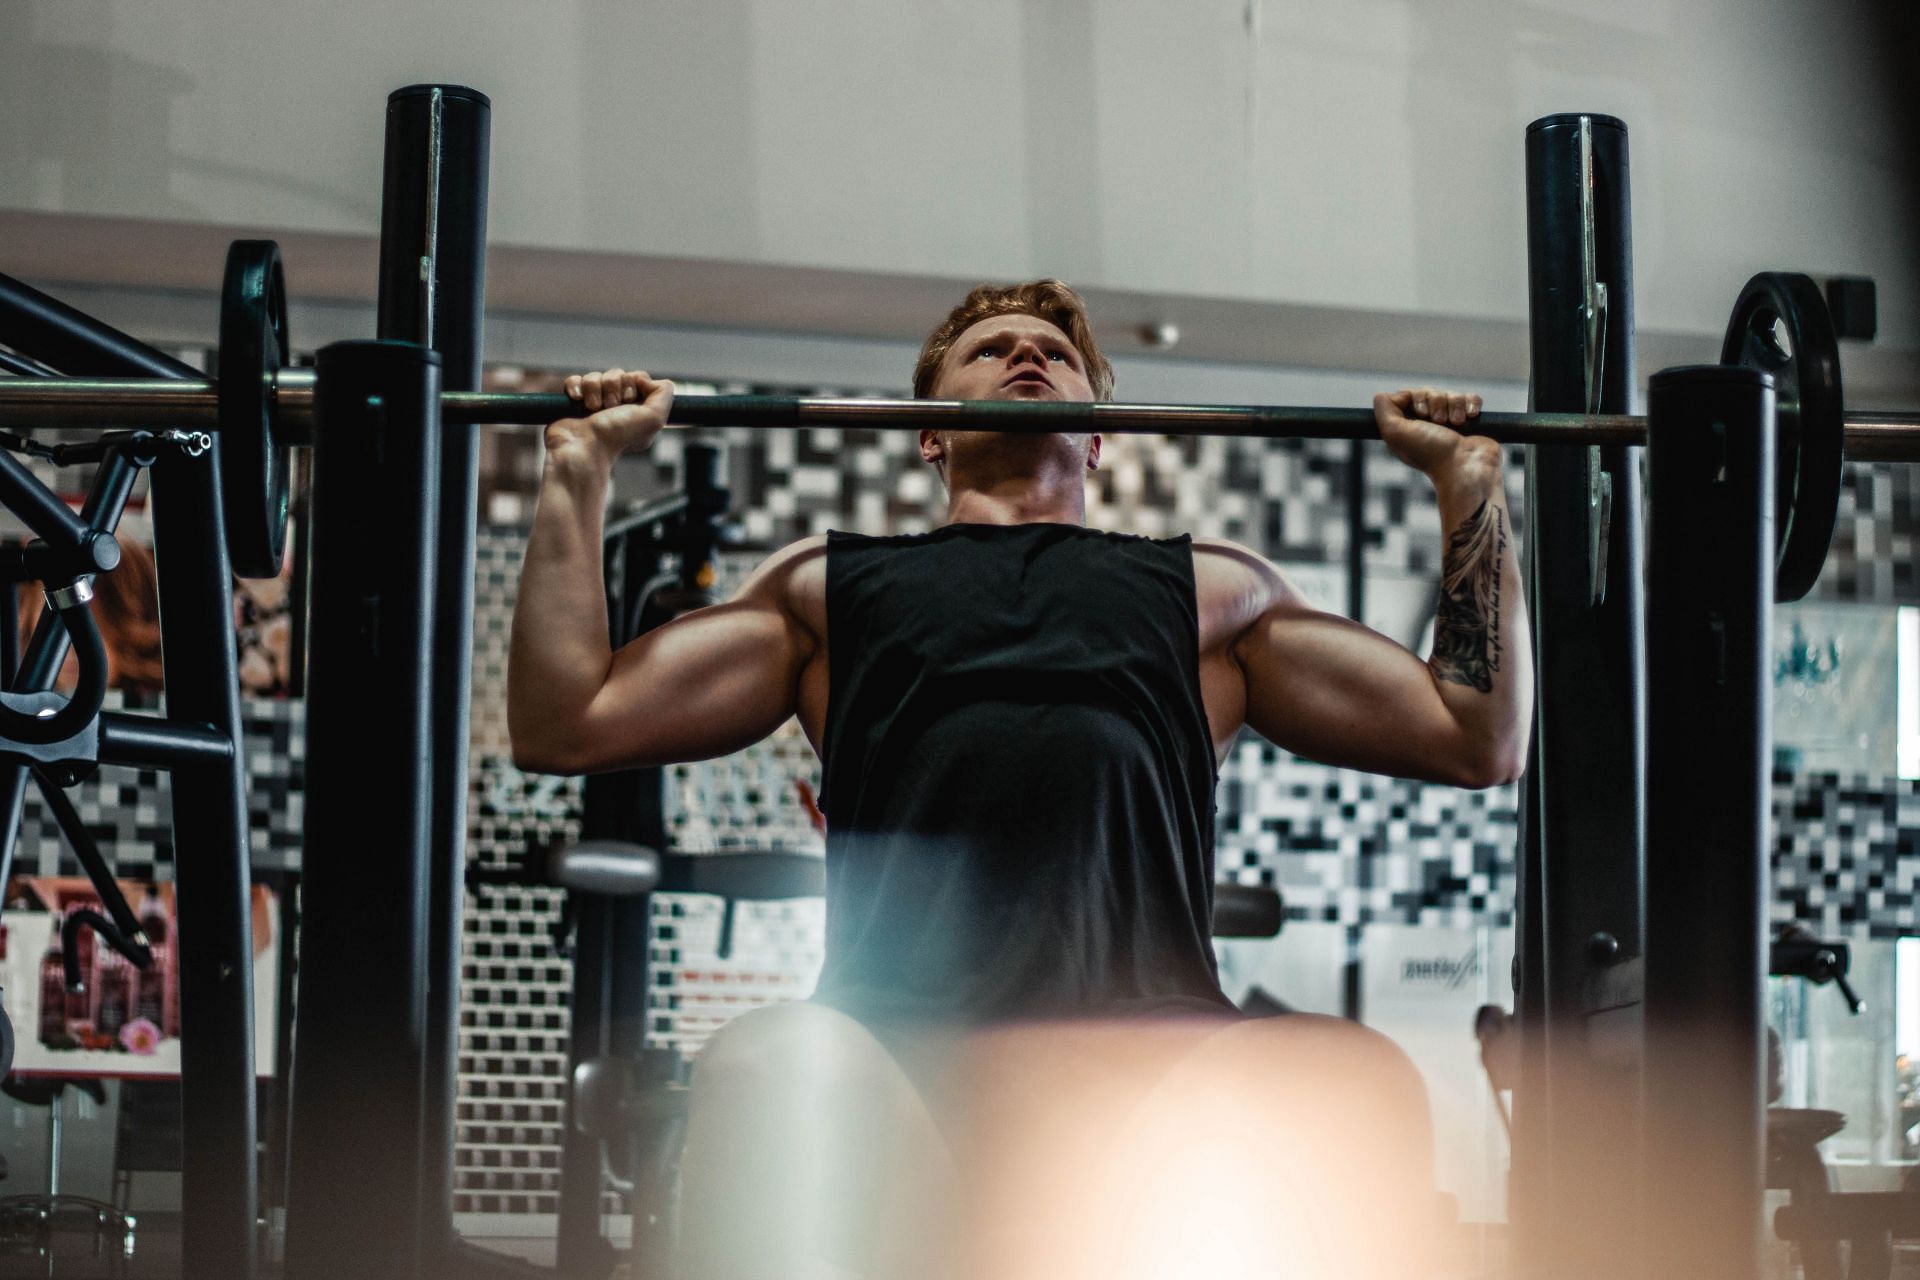 Here are the best compound exercises for when your schedule is packed! (Image via unsplash/Arthur Edelemans)